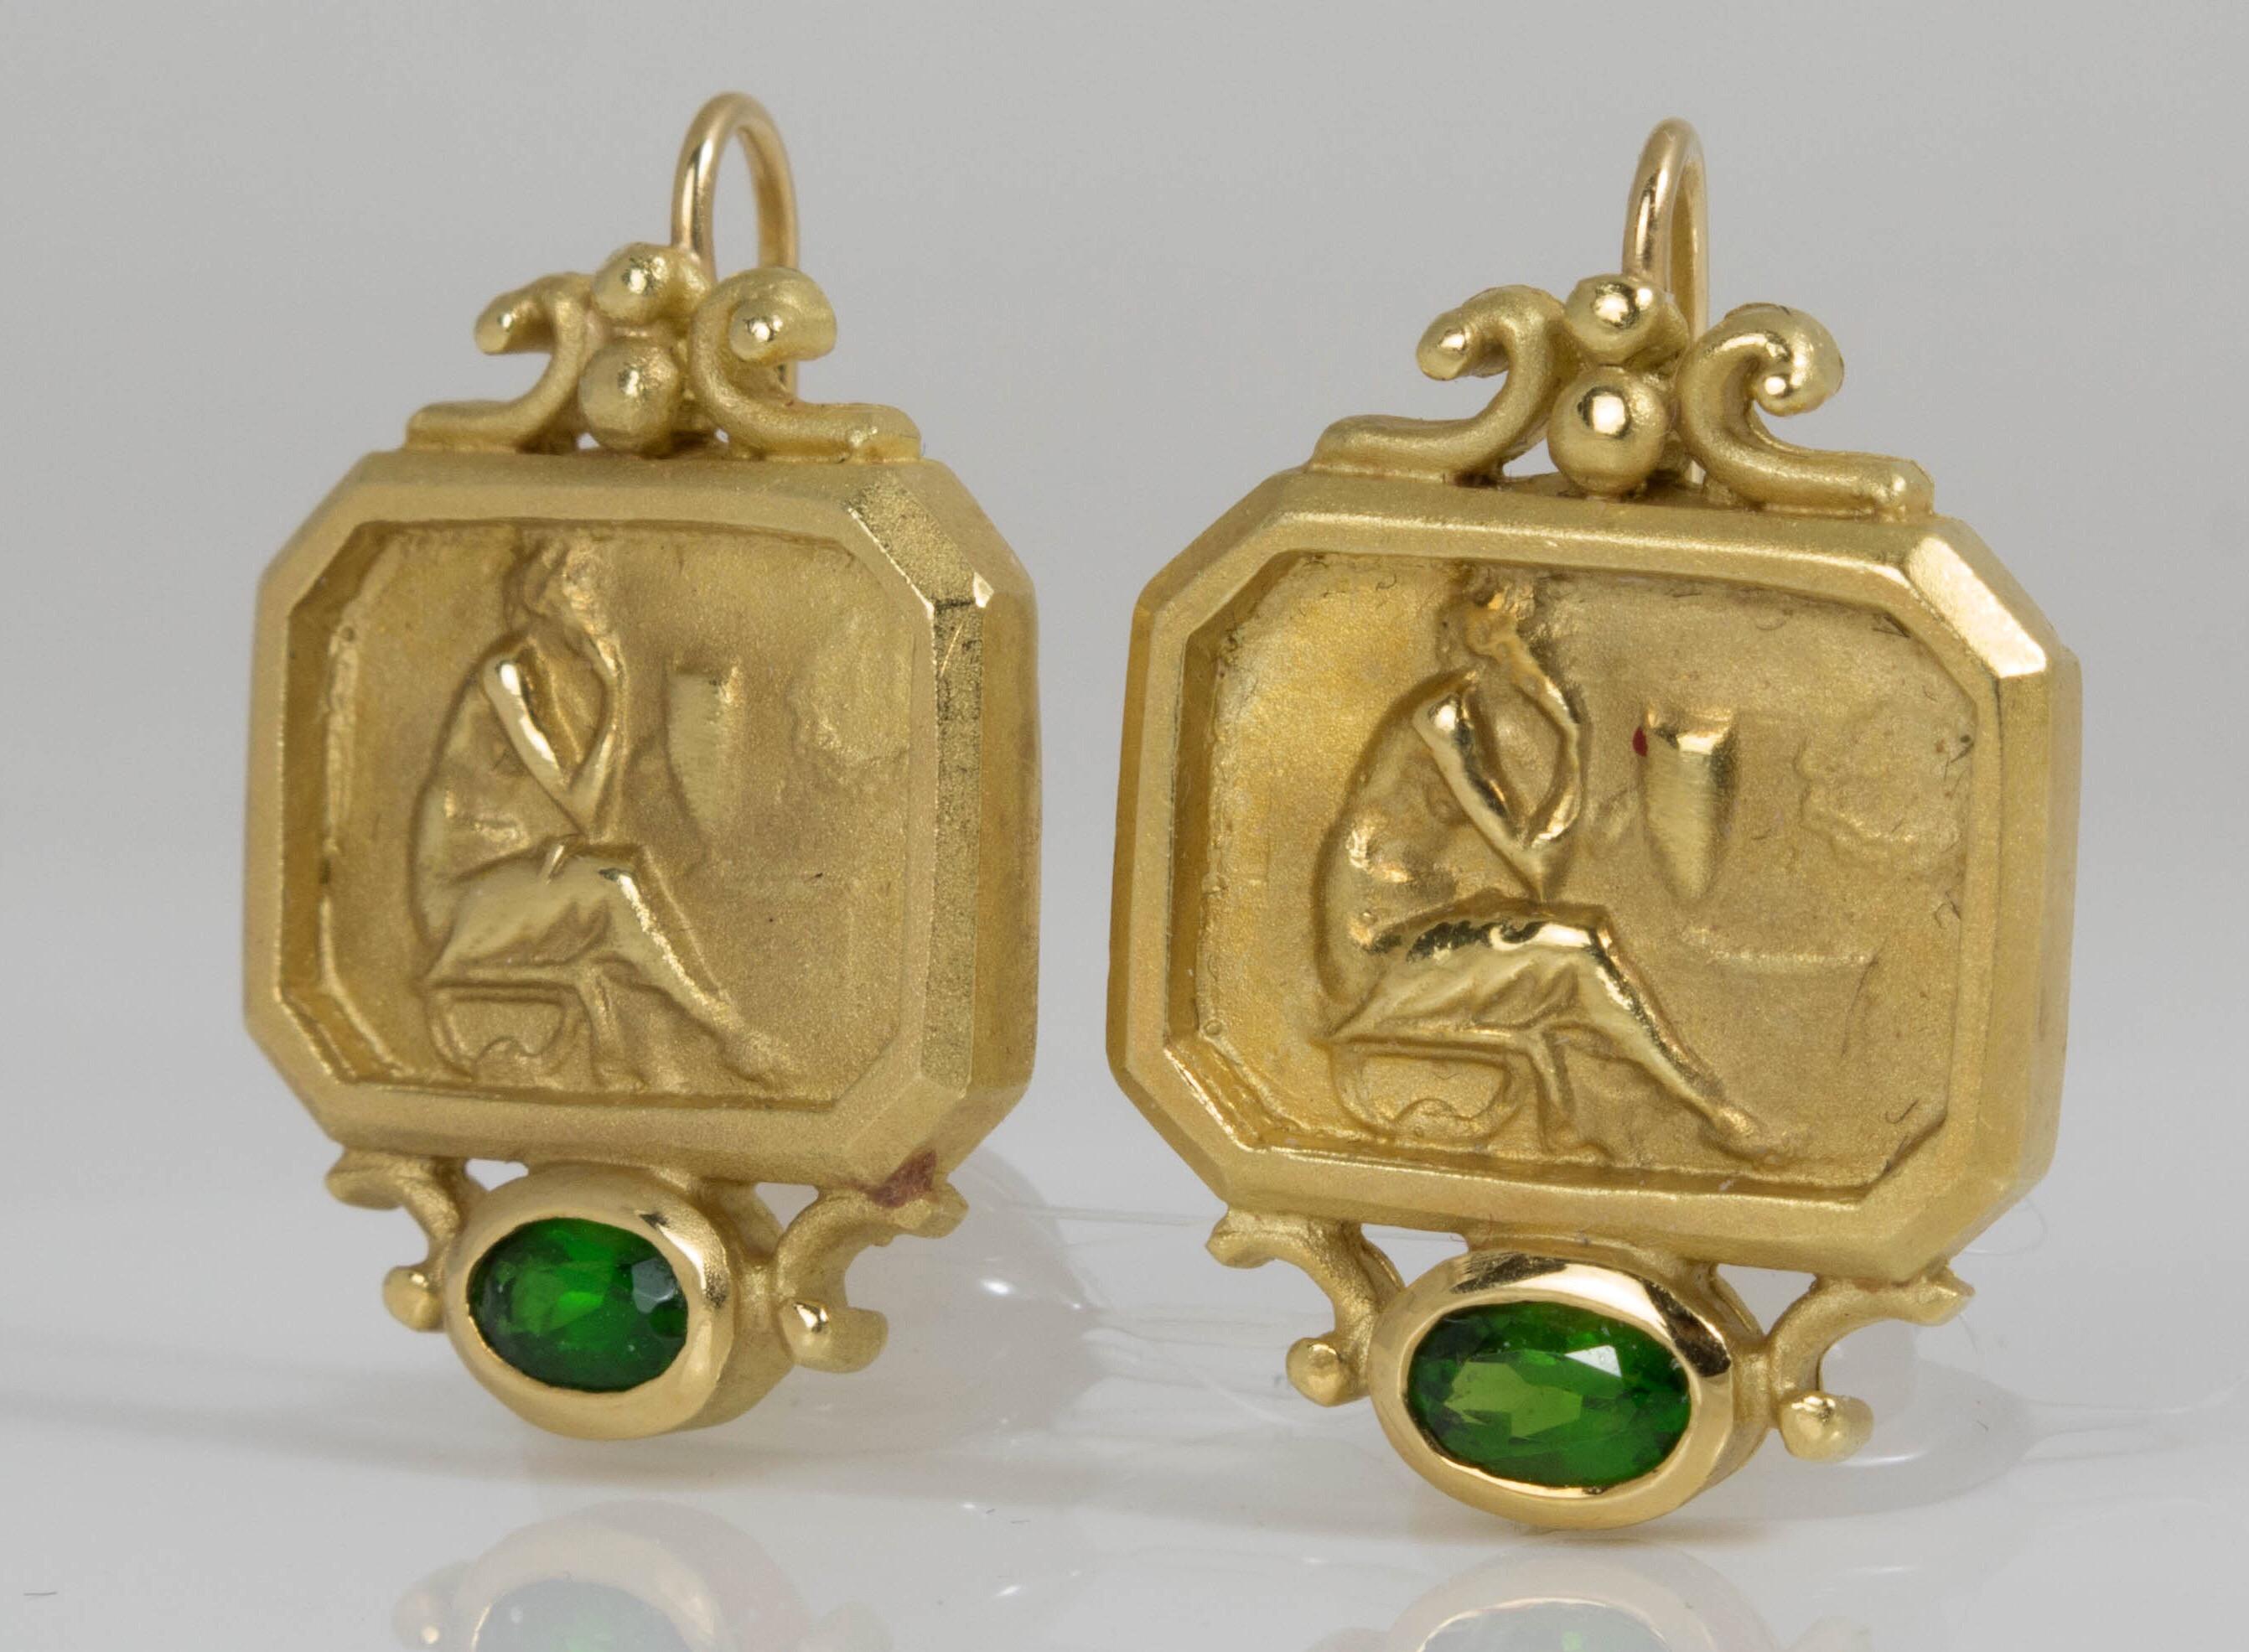 Oval Cut SeidenGang Athena Earrings in 18k Yellow Gold with Green Tourmaline